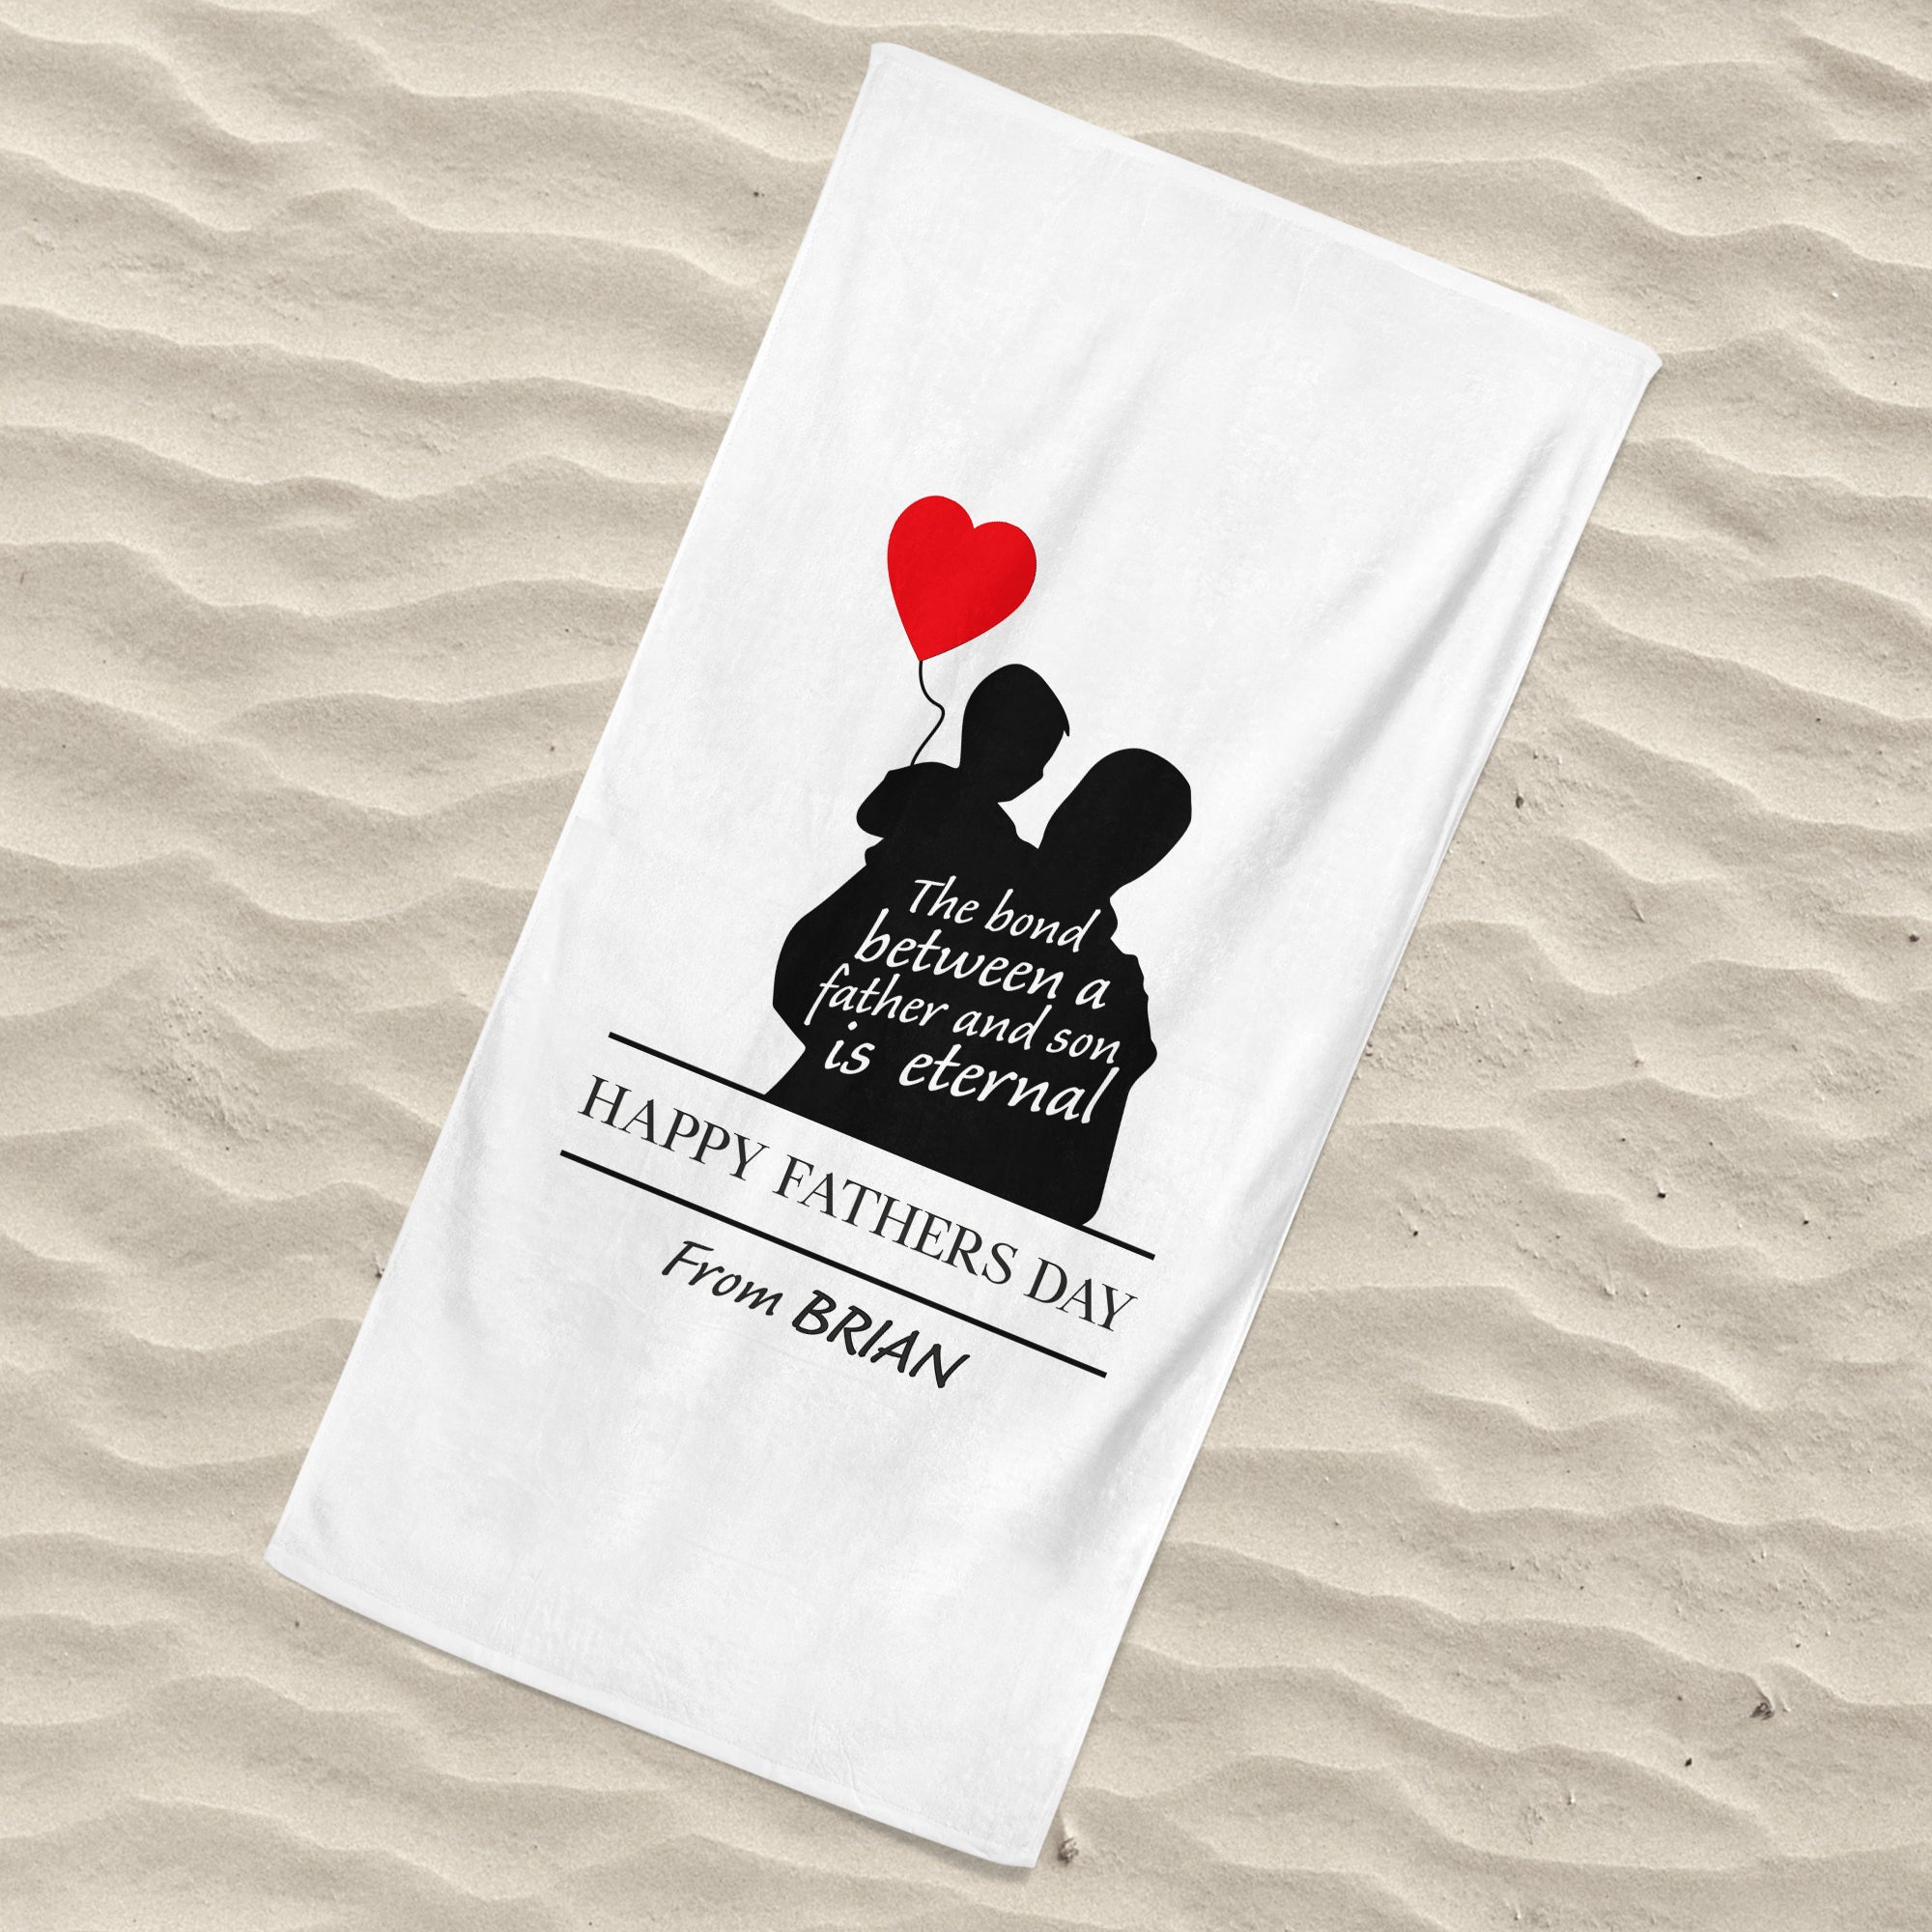 Beach Towel White with Father and Son - Happy Fathers Day - Personalise with Name